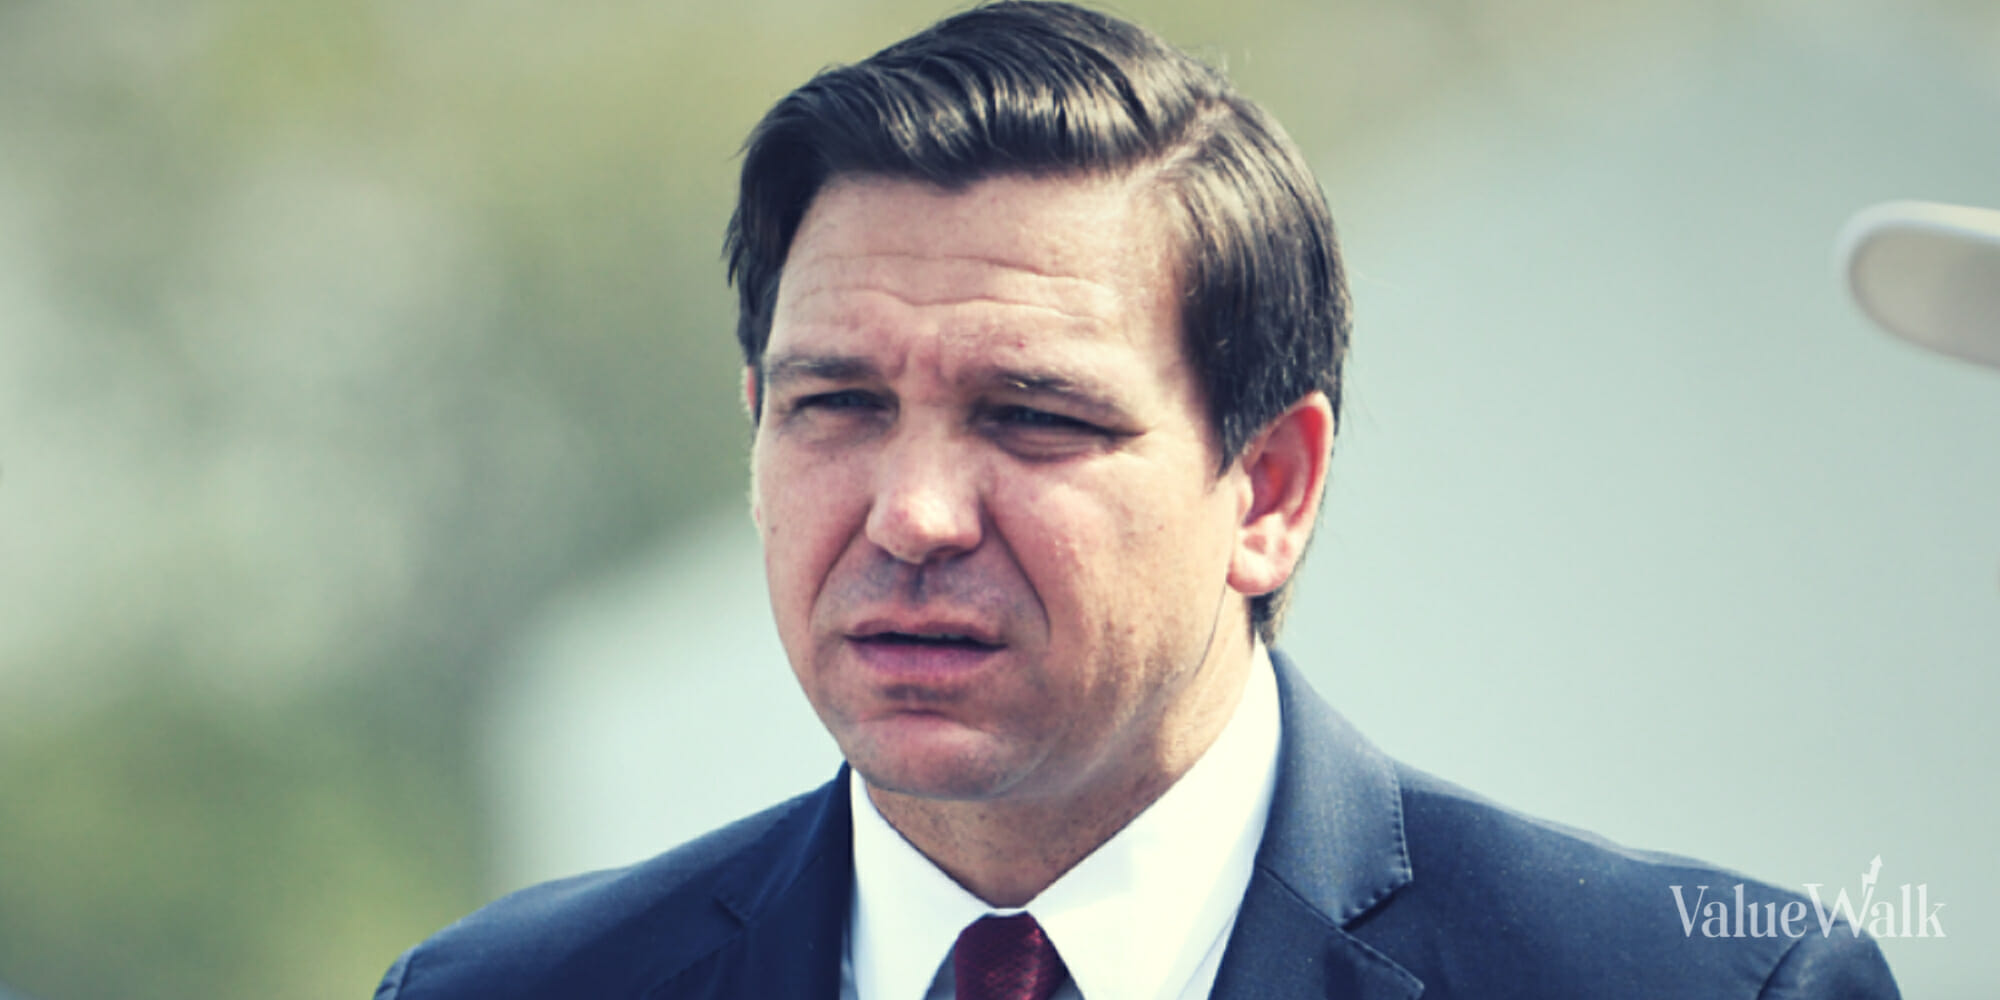 Gov. DeSantis Signs Large Tax Relief Bill With Tax Breaks From Florida